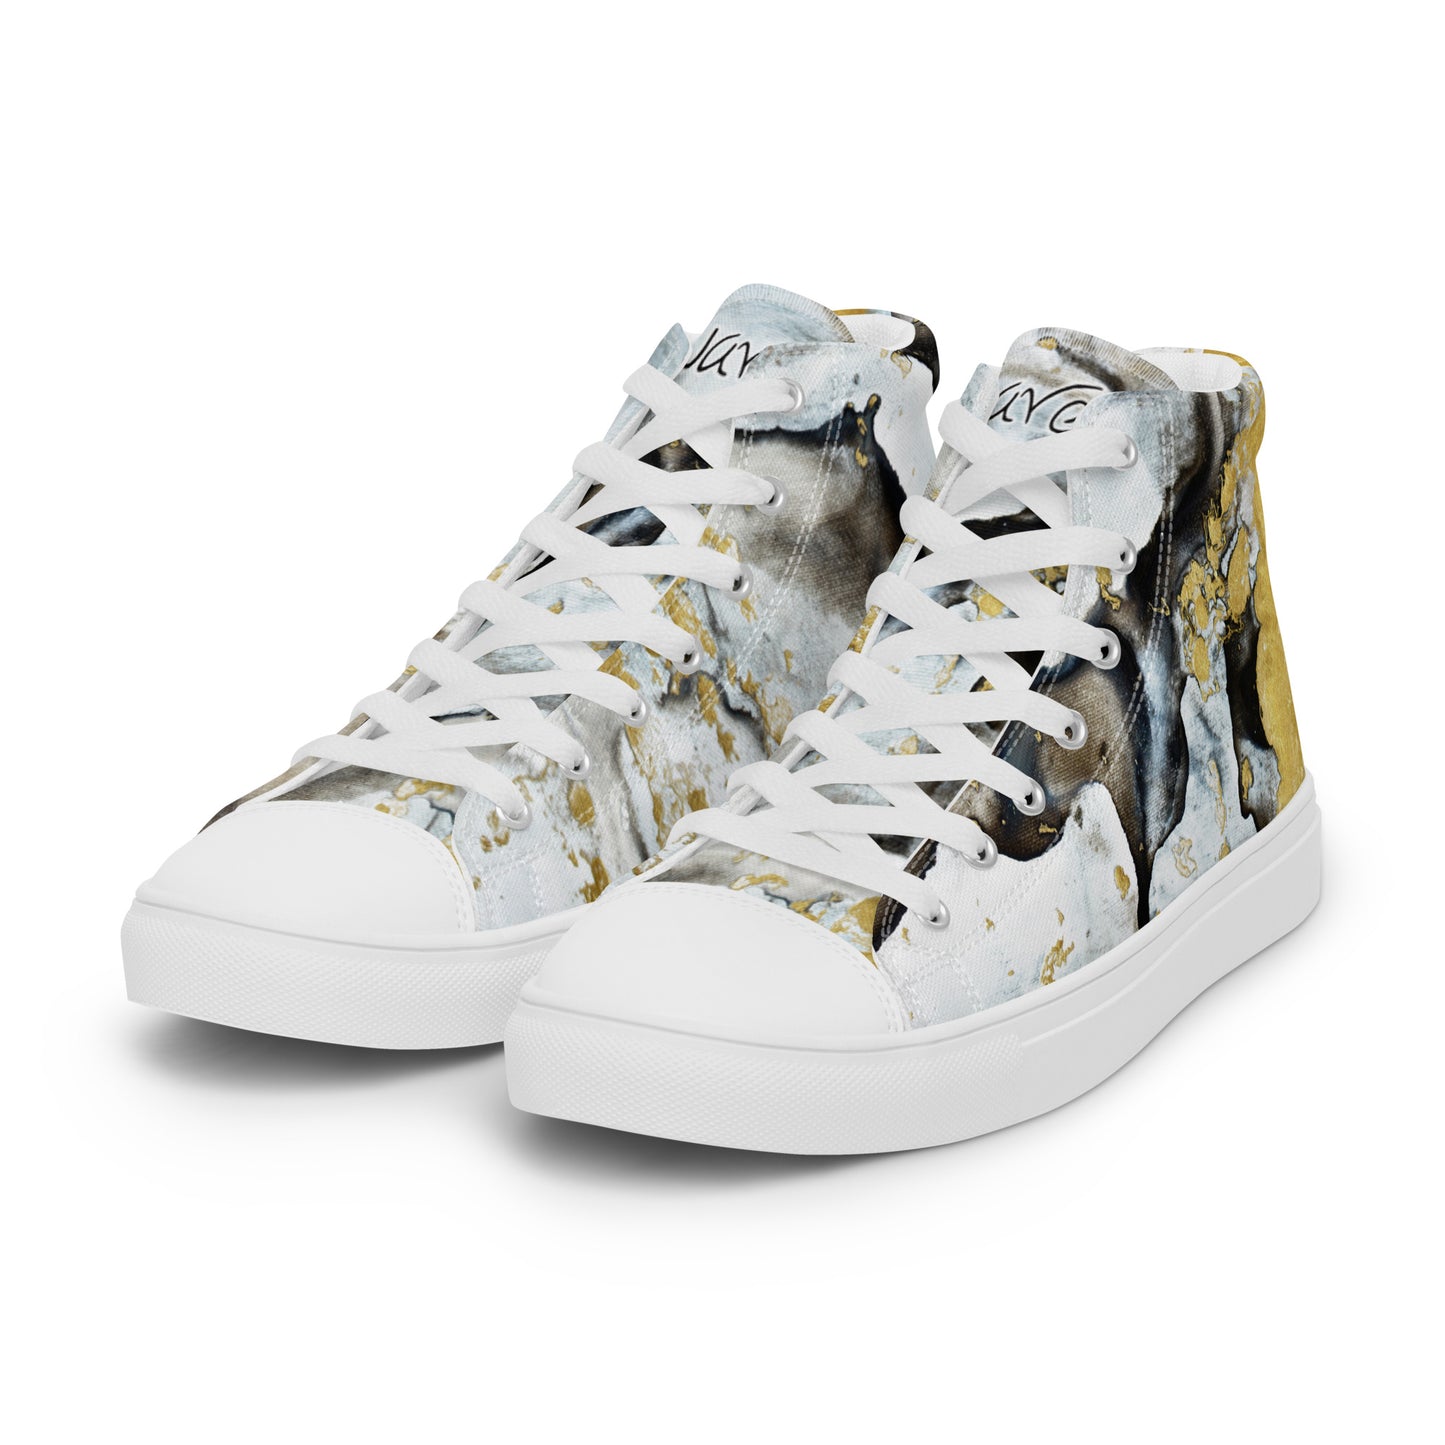 Men’s high top canvas shoes - Black and white design